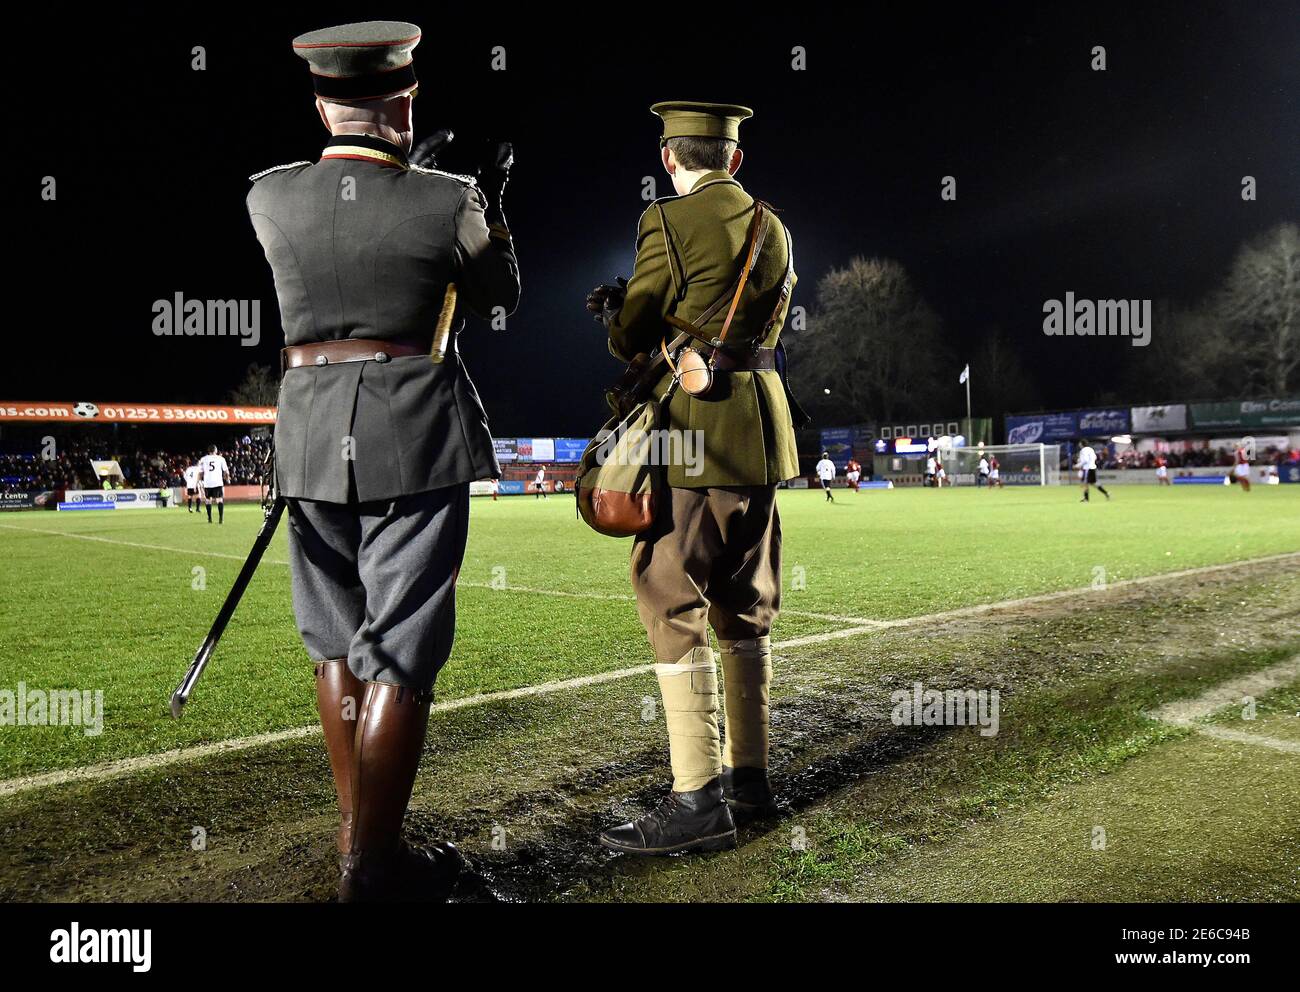 Two men wearing replica World War I British and German army uniforms watch  a soccer match between the British Army and German Bundeswehr at Aldershot  Town FC stadium in Aldershot in south